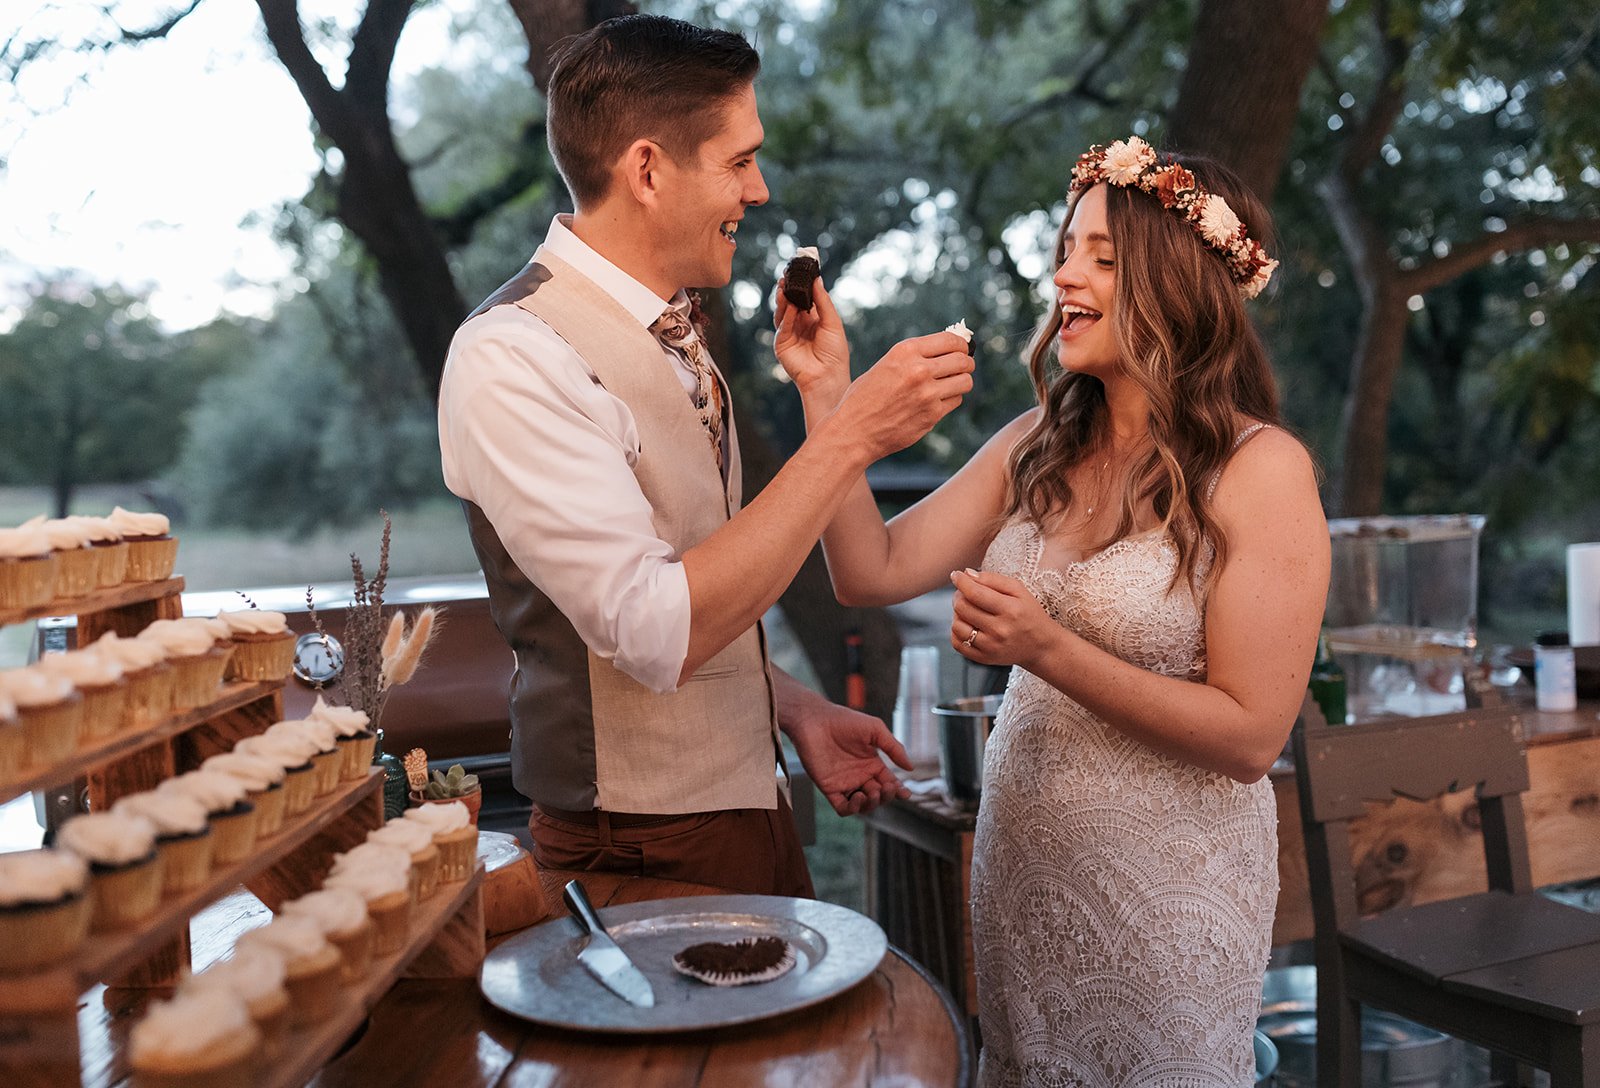 The couple shared a cupcake for their cake cutting